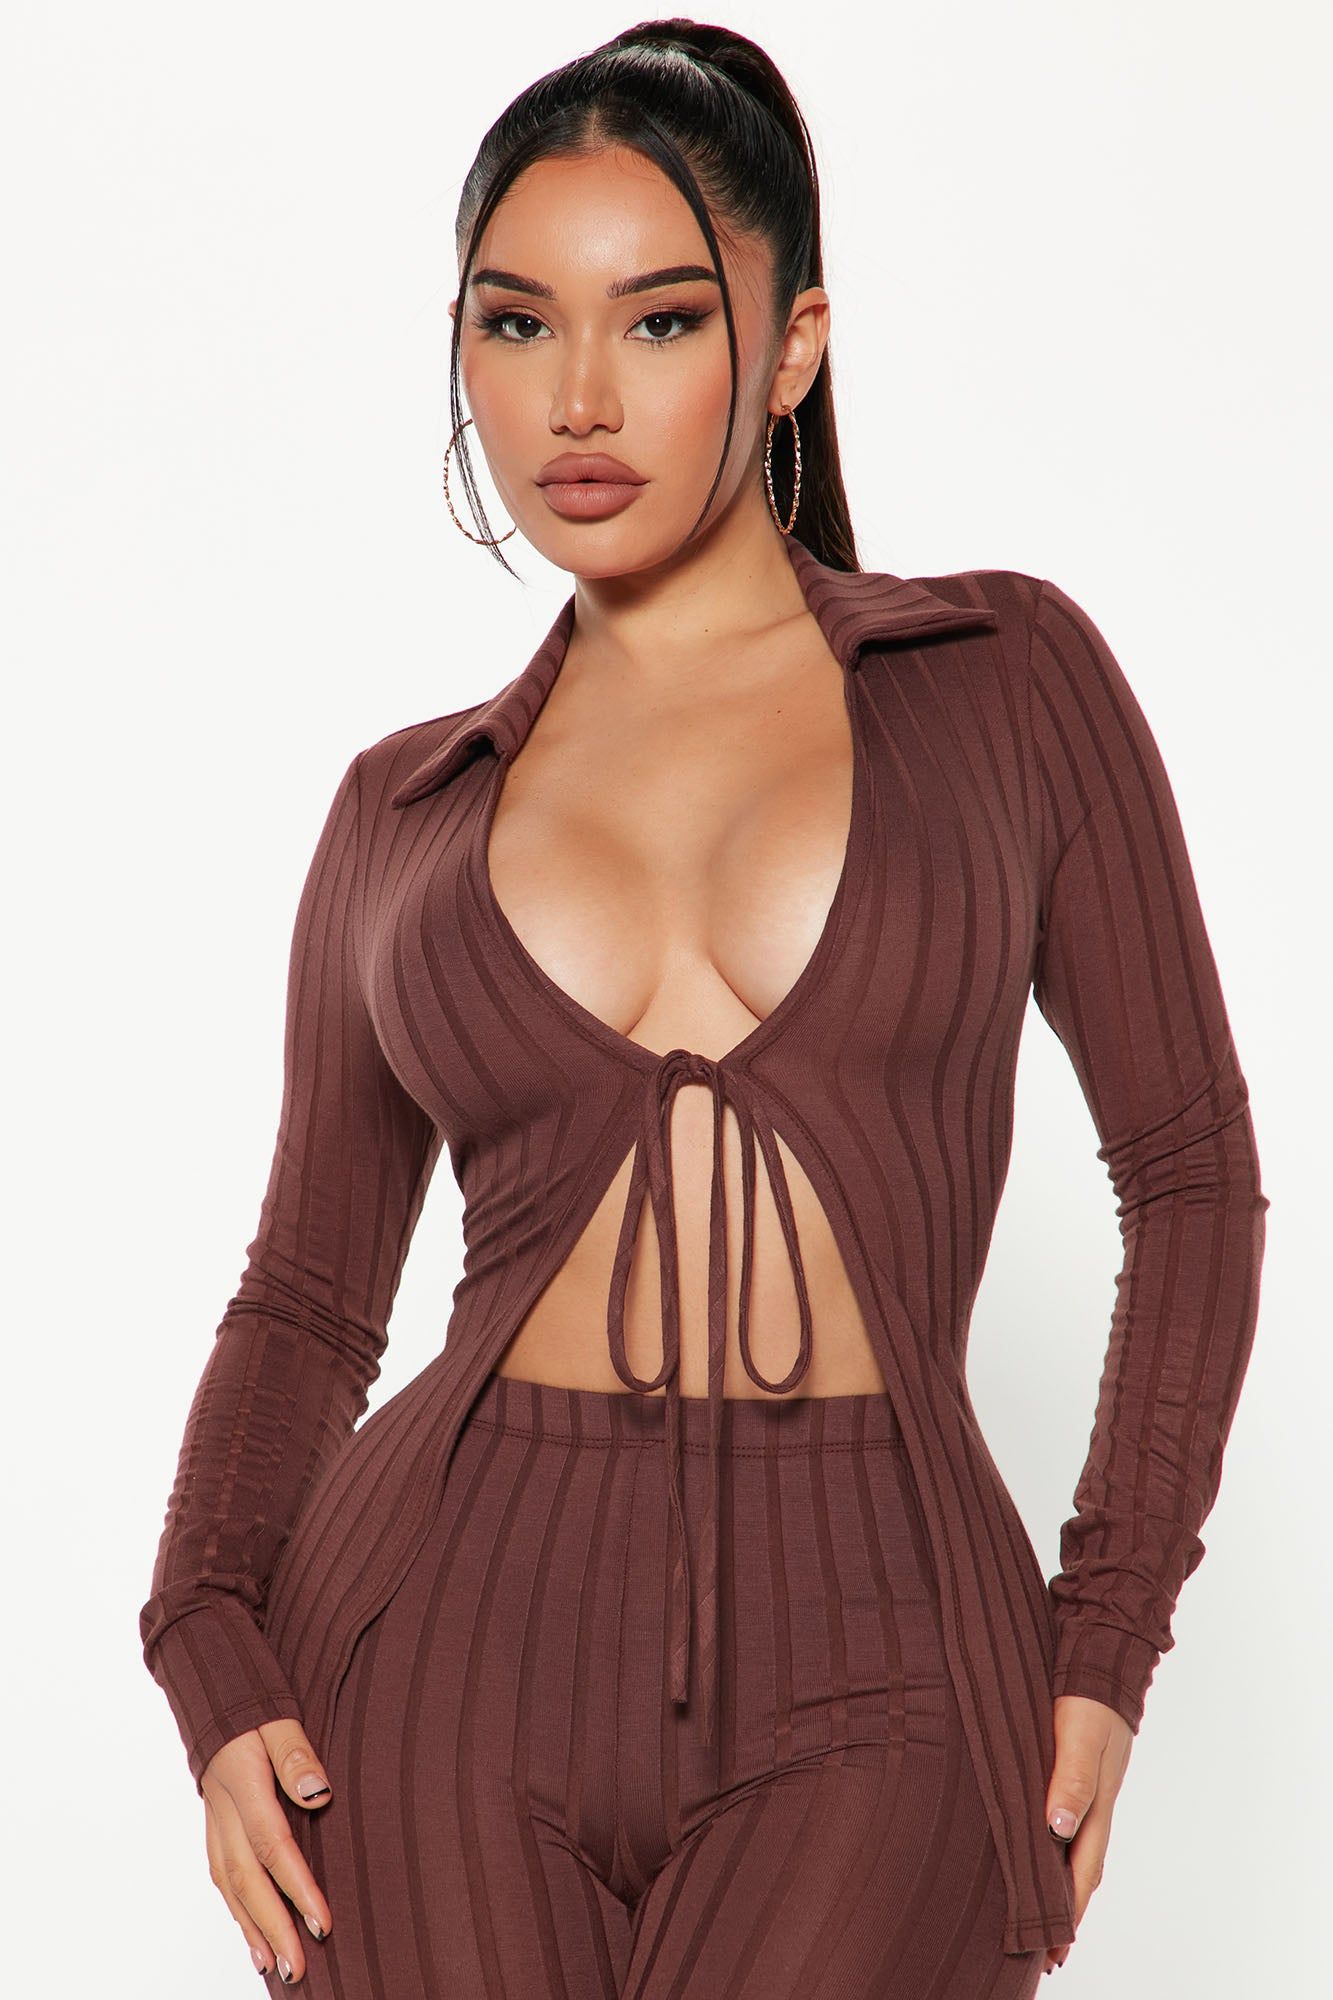 Women's Only The Truth Pant Set in Brown Size 2X by Fashion Nova